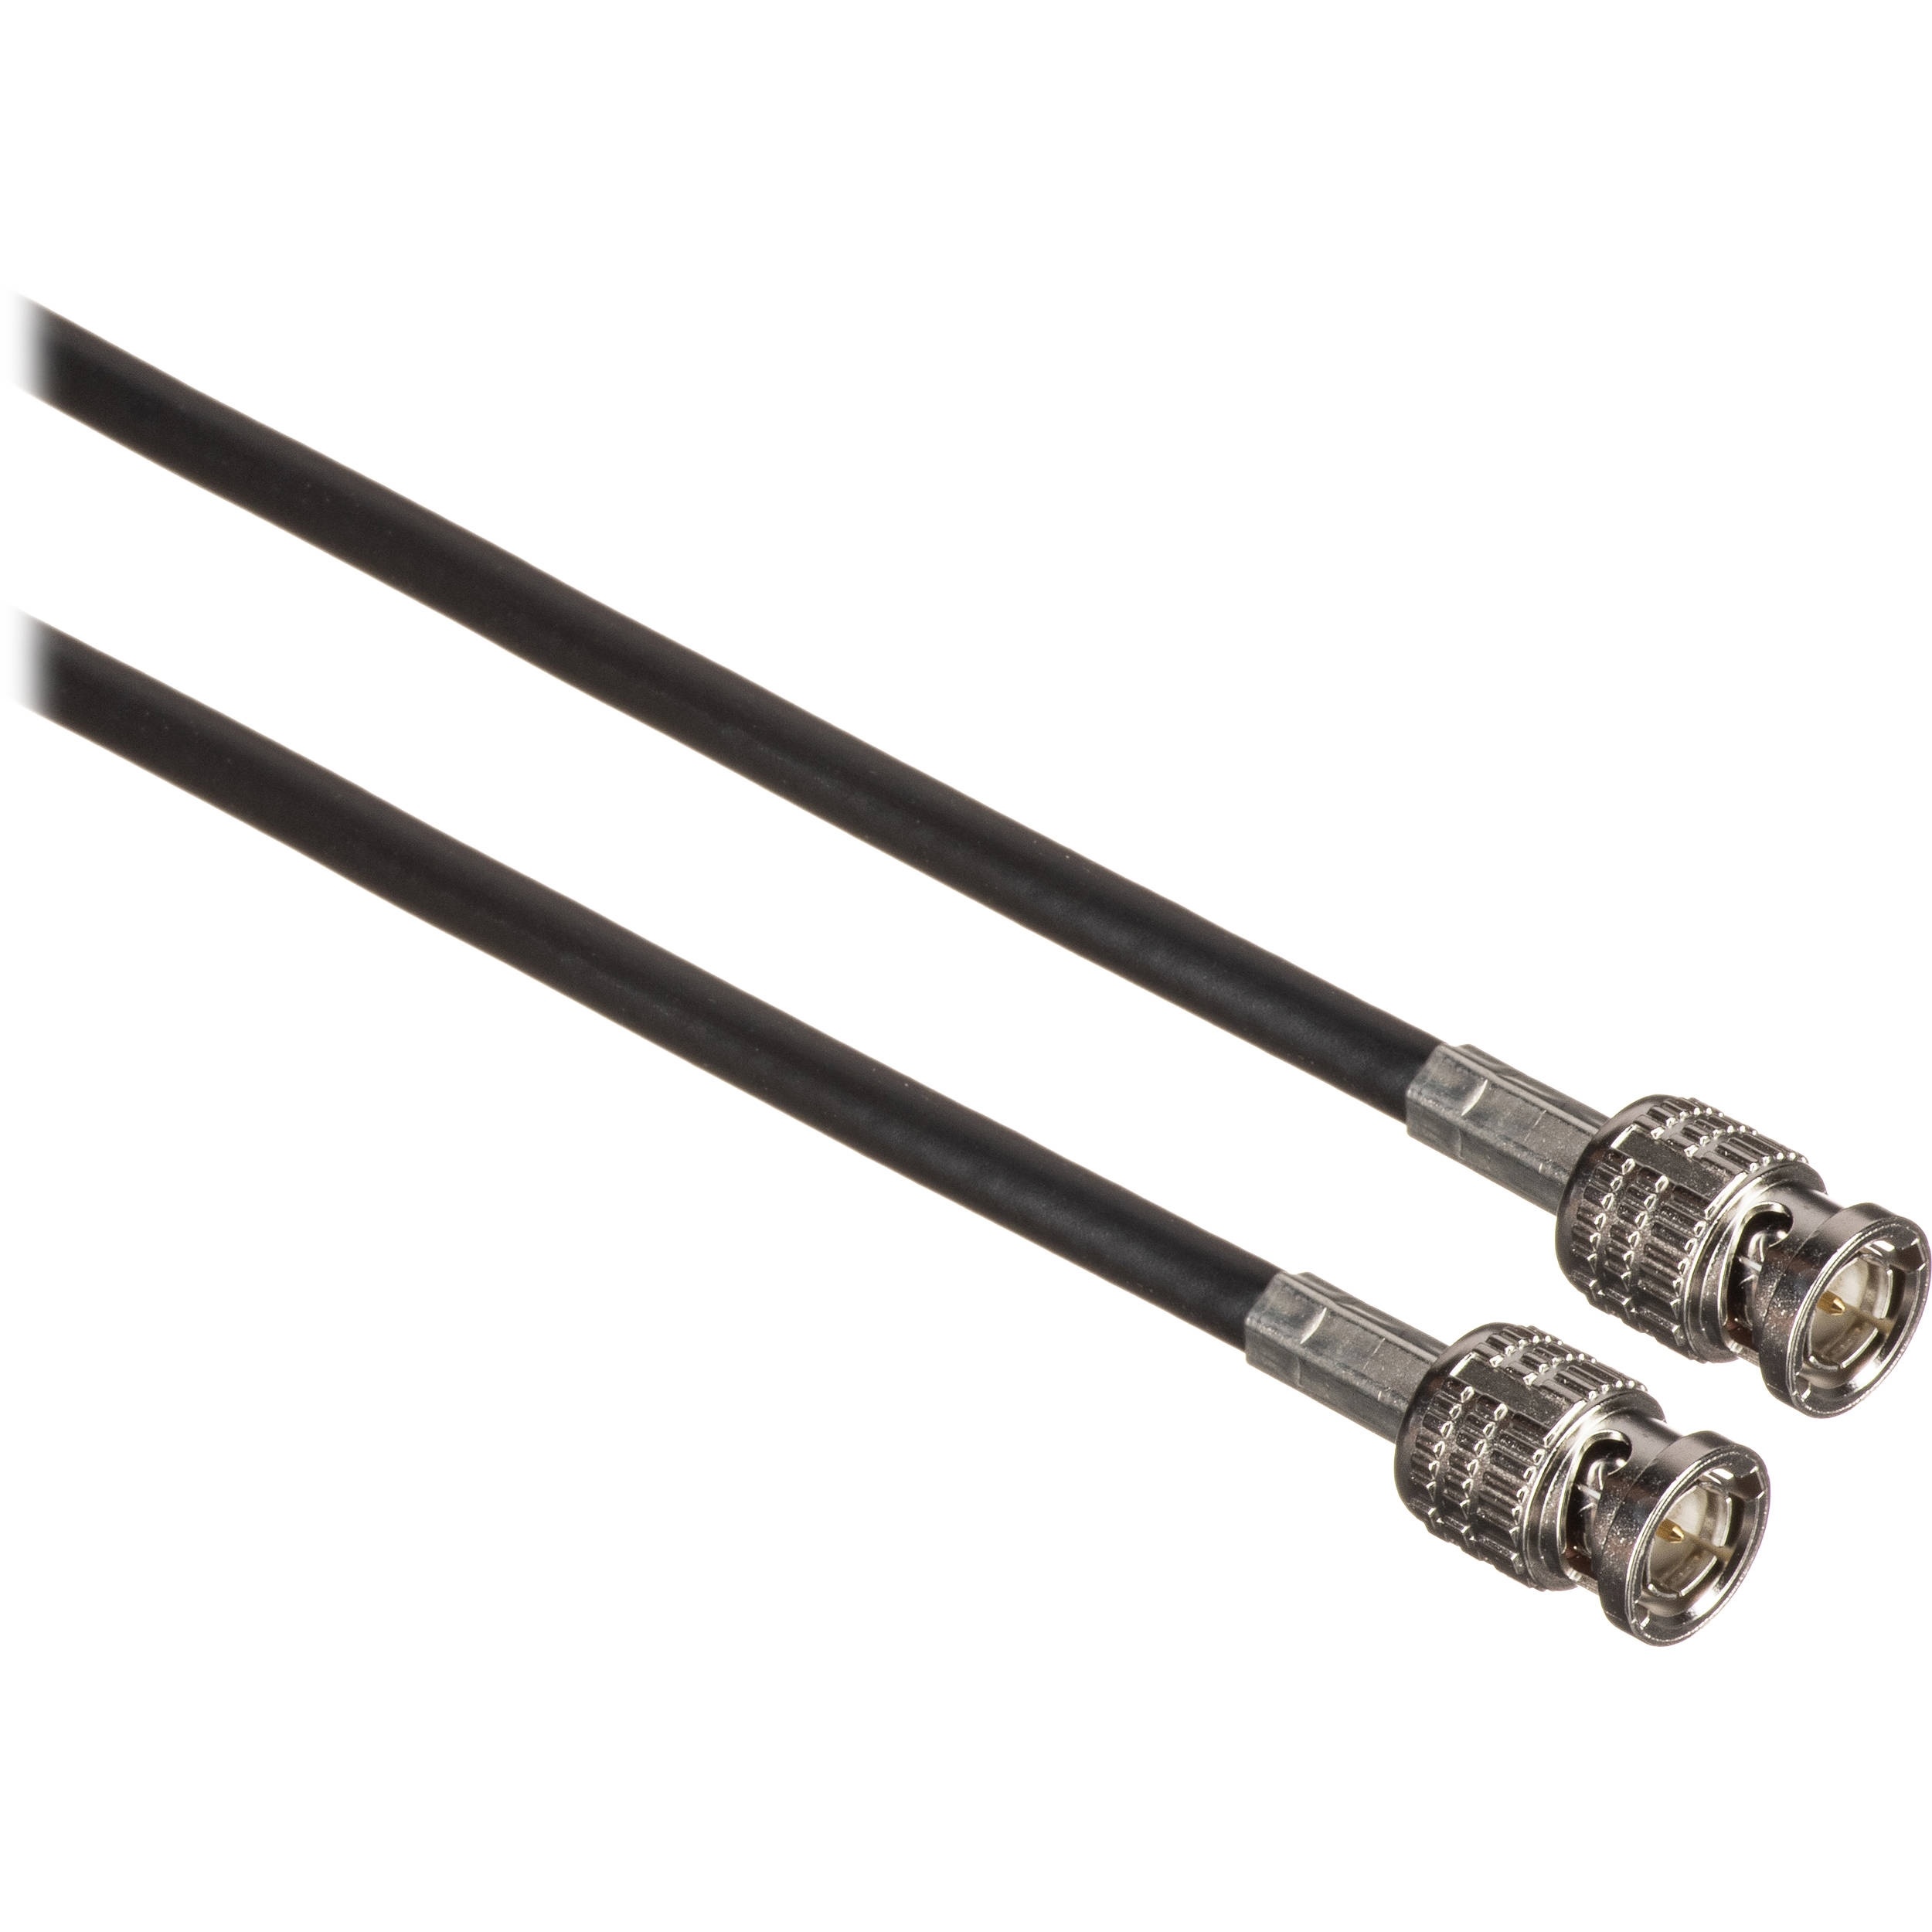 Canare HD-SDI Flexible Coaxial Cable with BNC Connectors (25' / 7.62 m)